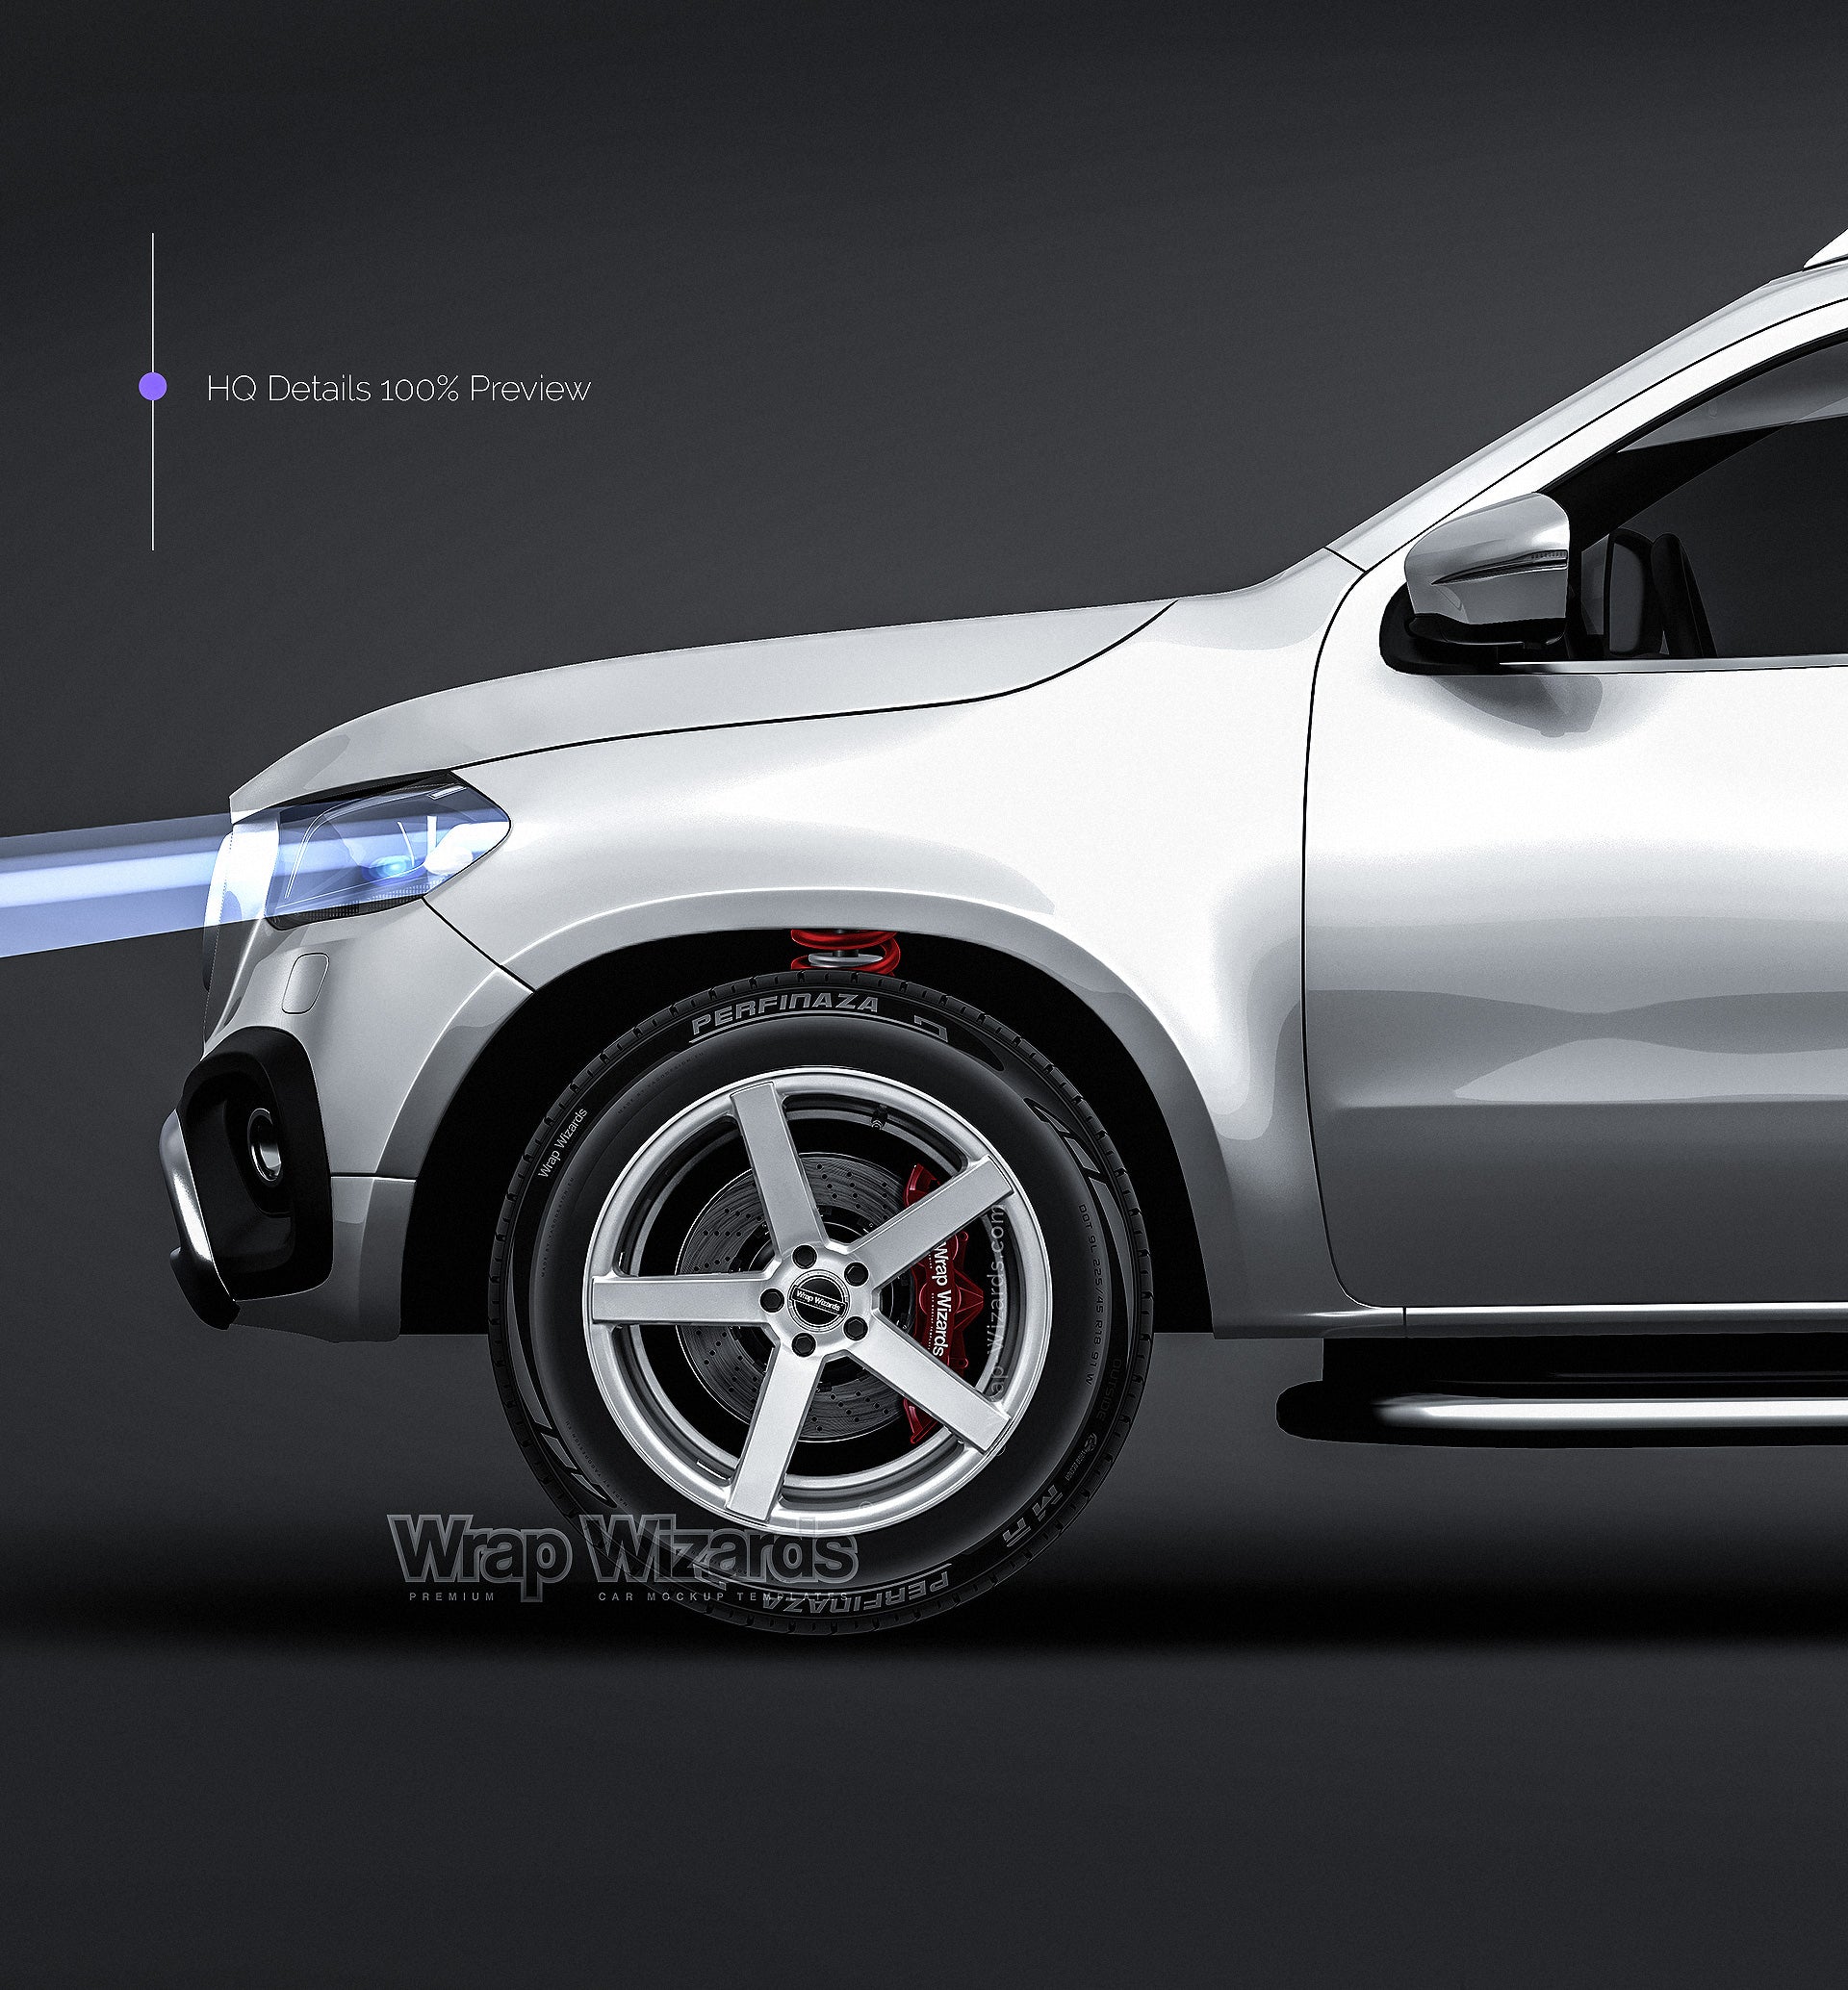 Mercedes-Benz X-Class 2018 glossy finish - all sides Car Mockup Template.psd